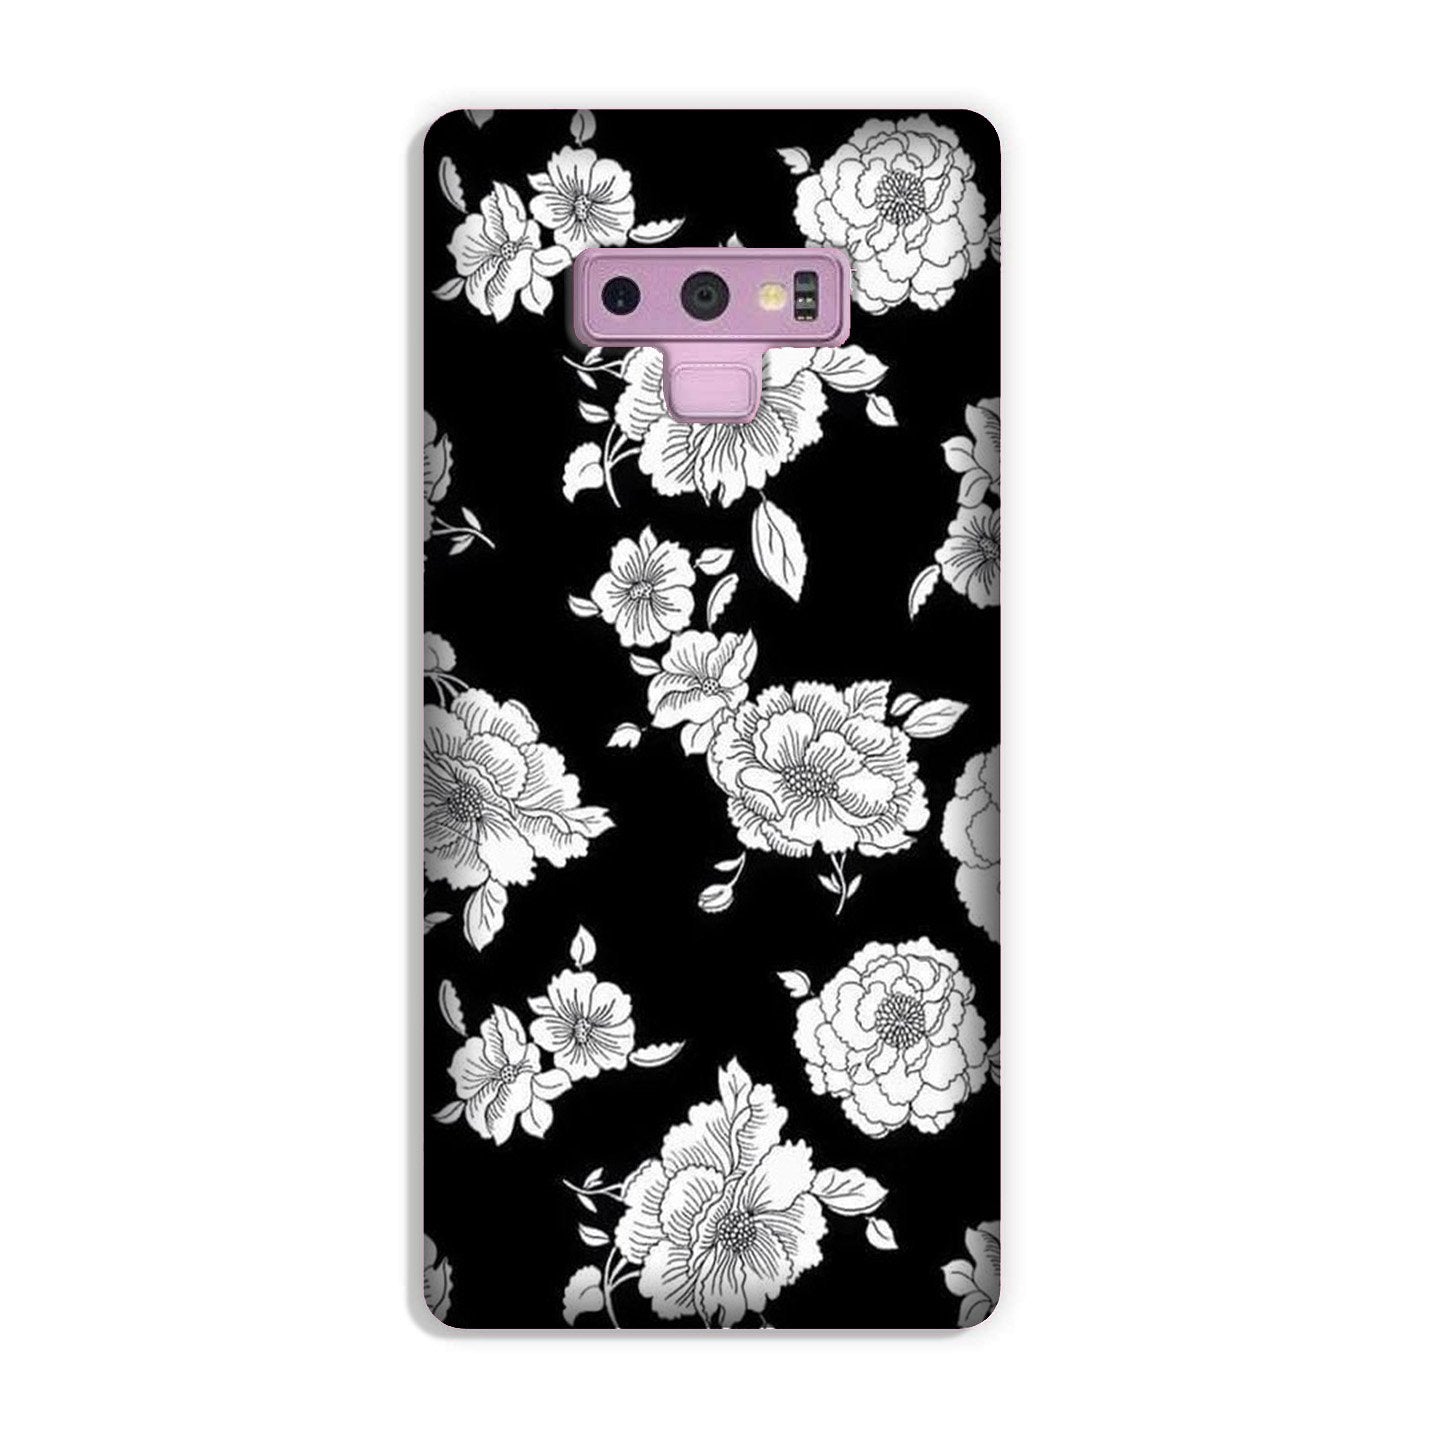 White flowers Black Background Case for Galaxy Note 9